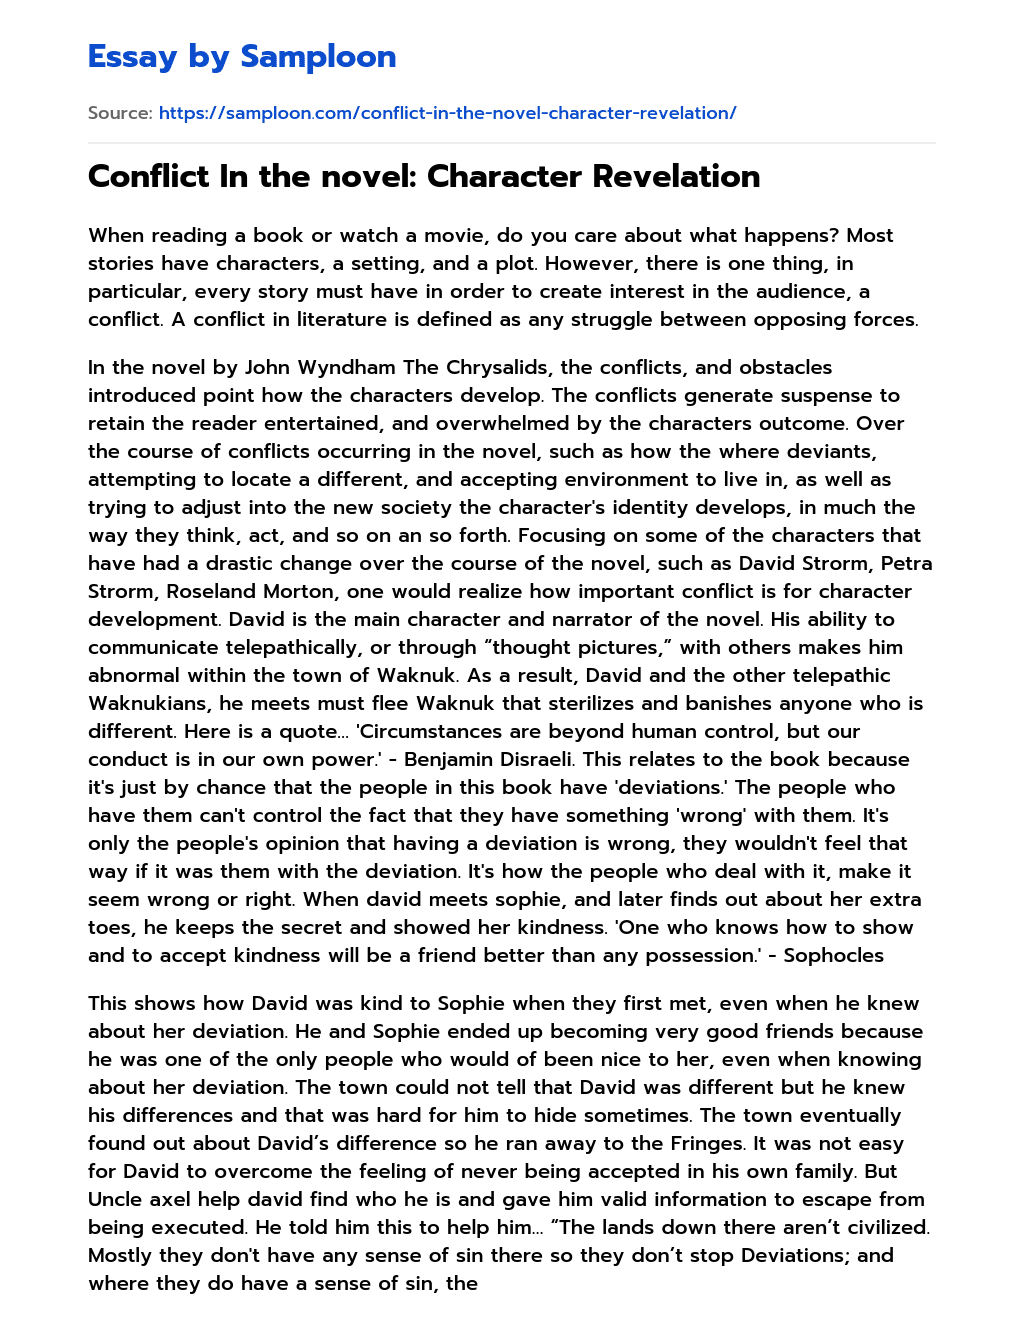 Conflict In the novel: Character Revelation essay